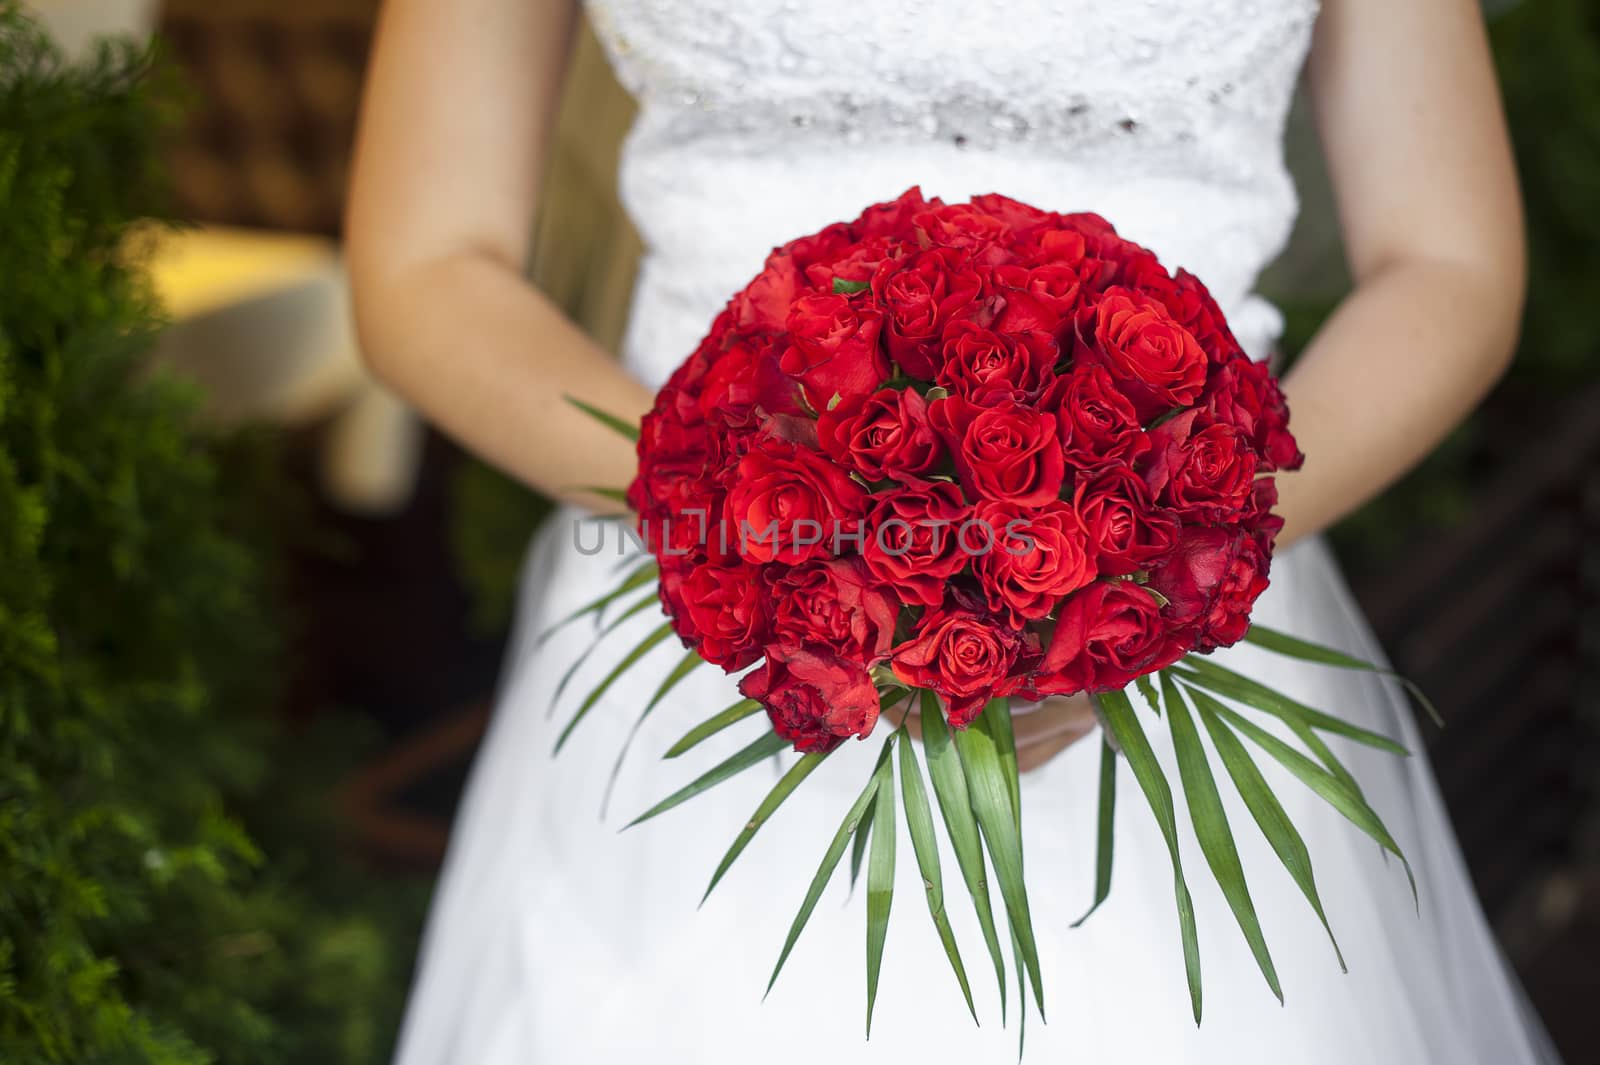 wedding bouquet of red roses and leaves in hand of bride by timonko